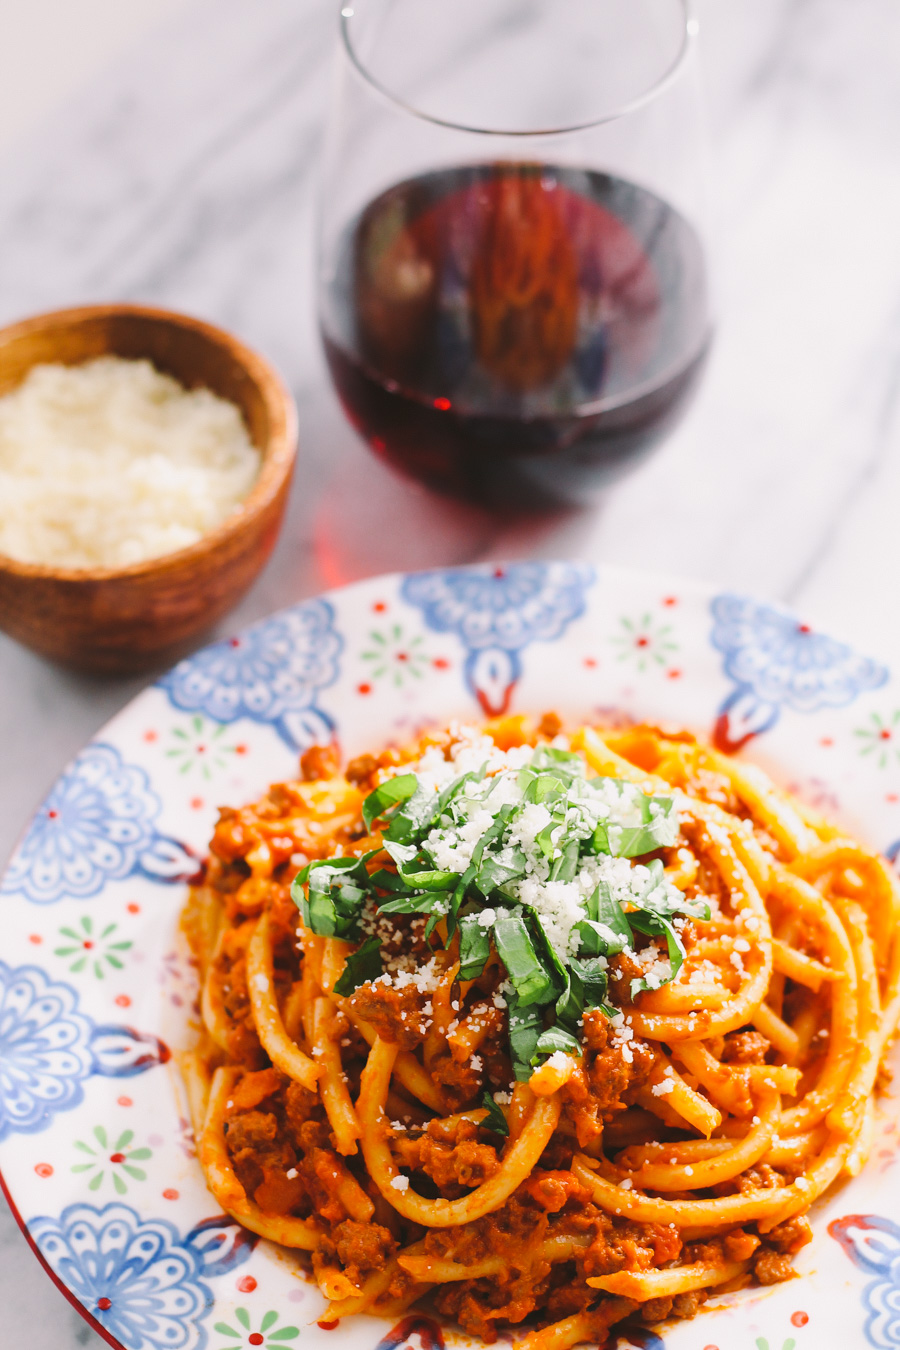 An overhead and close up shot of ground turkey bolognese sauce served with bucatini atop a colorful patterned plate. The plate sits atop a white and gray marble surface. The pasta has been garnished with fresh chopped basil and fresh grated parmesan cheese. A small wooden pinch bowl filled with grated parmesan and a glass of red wine rest alongside the plate.